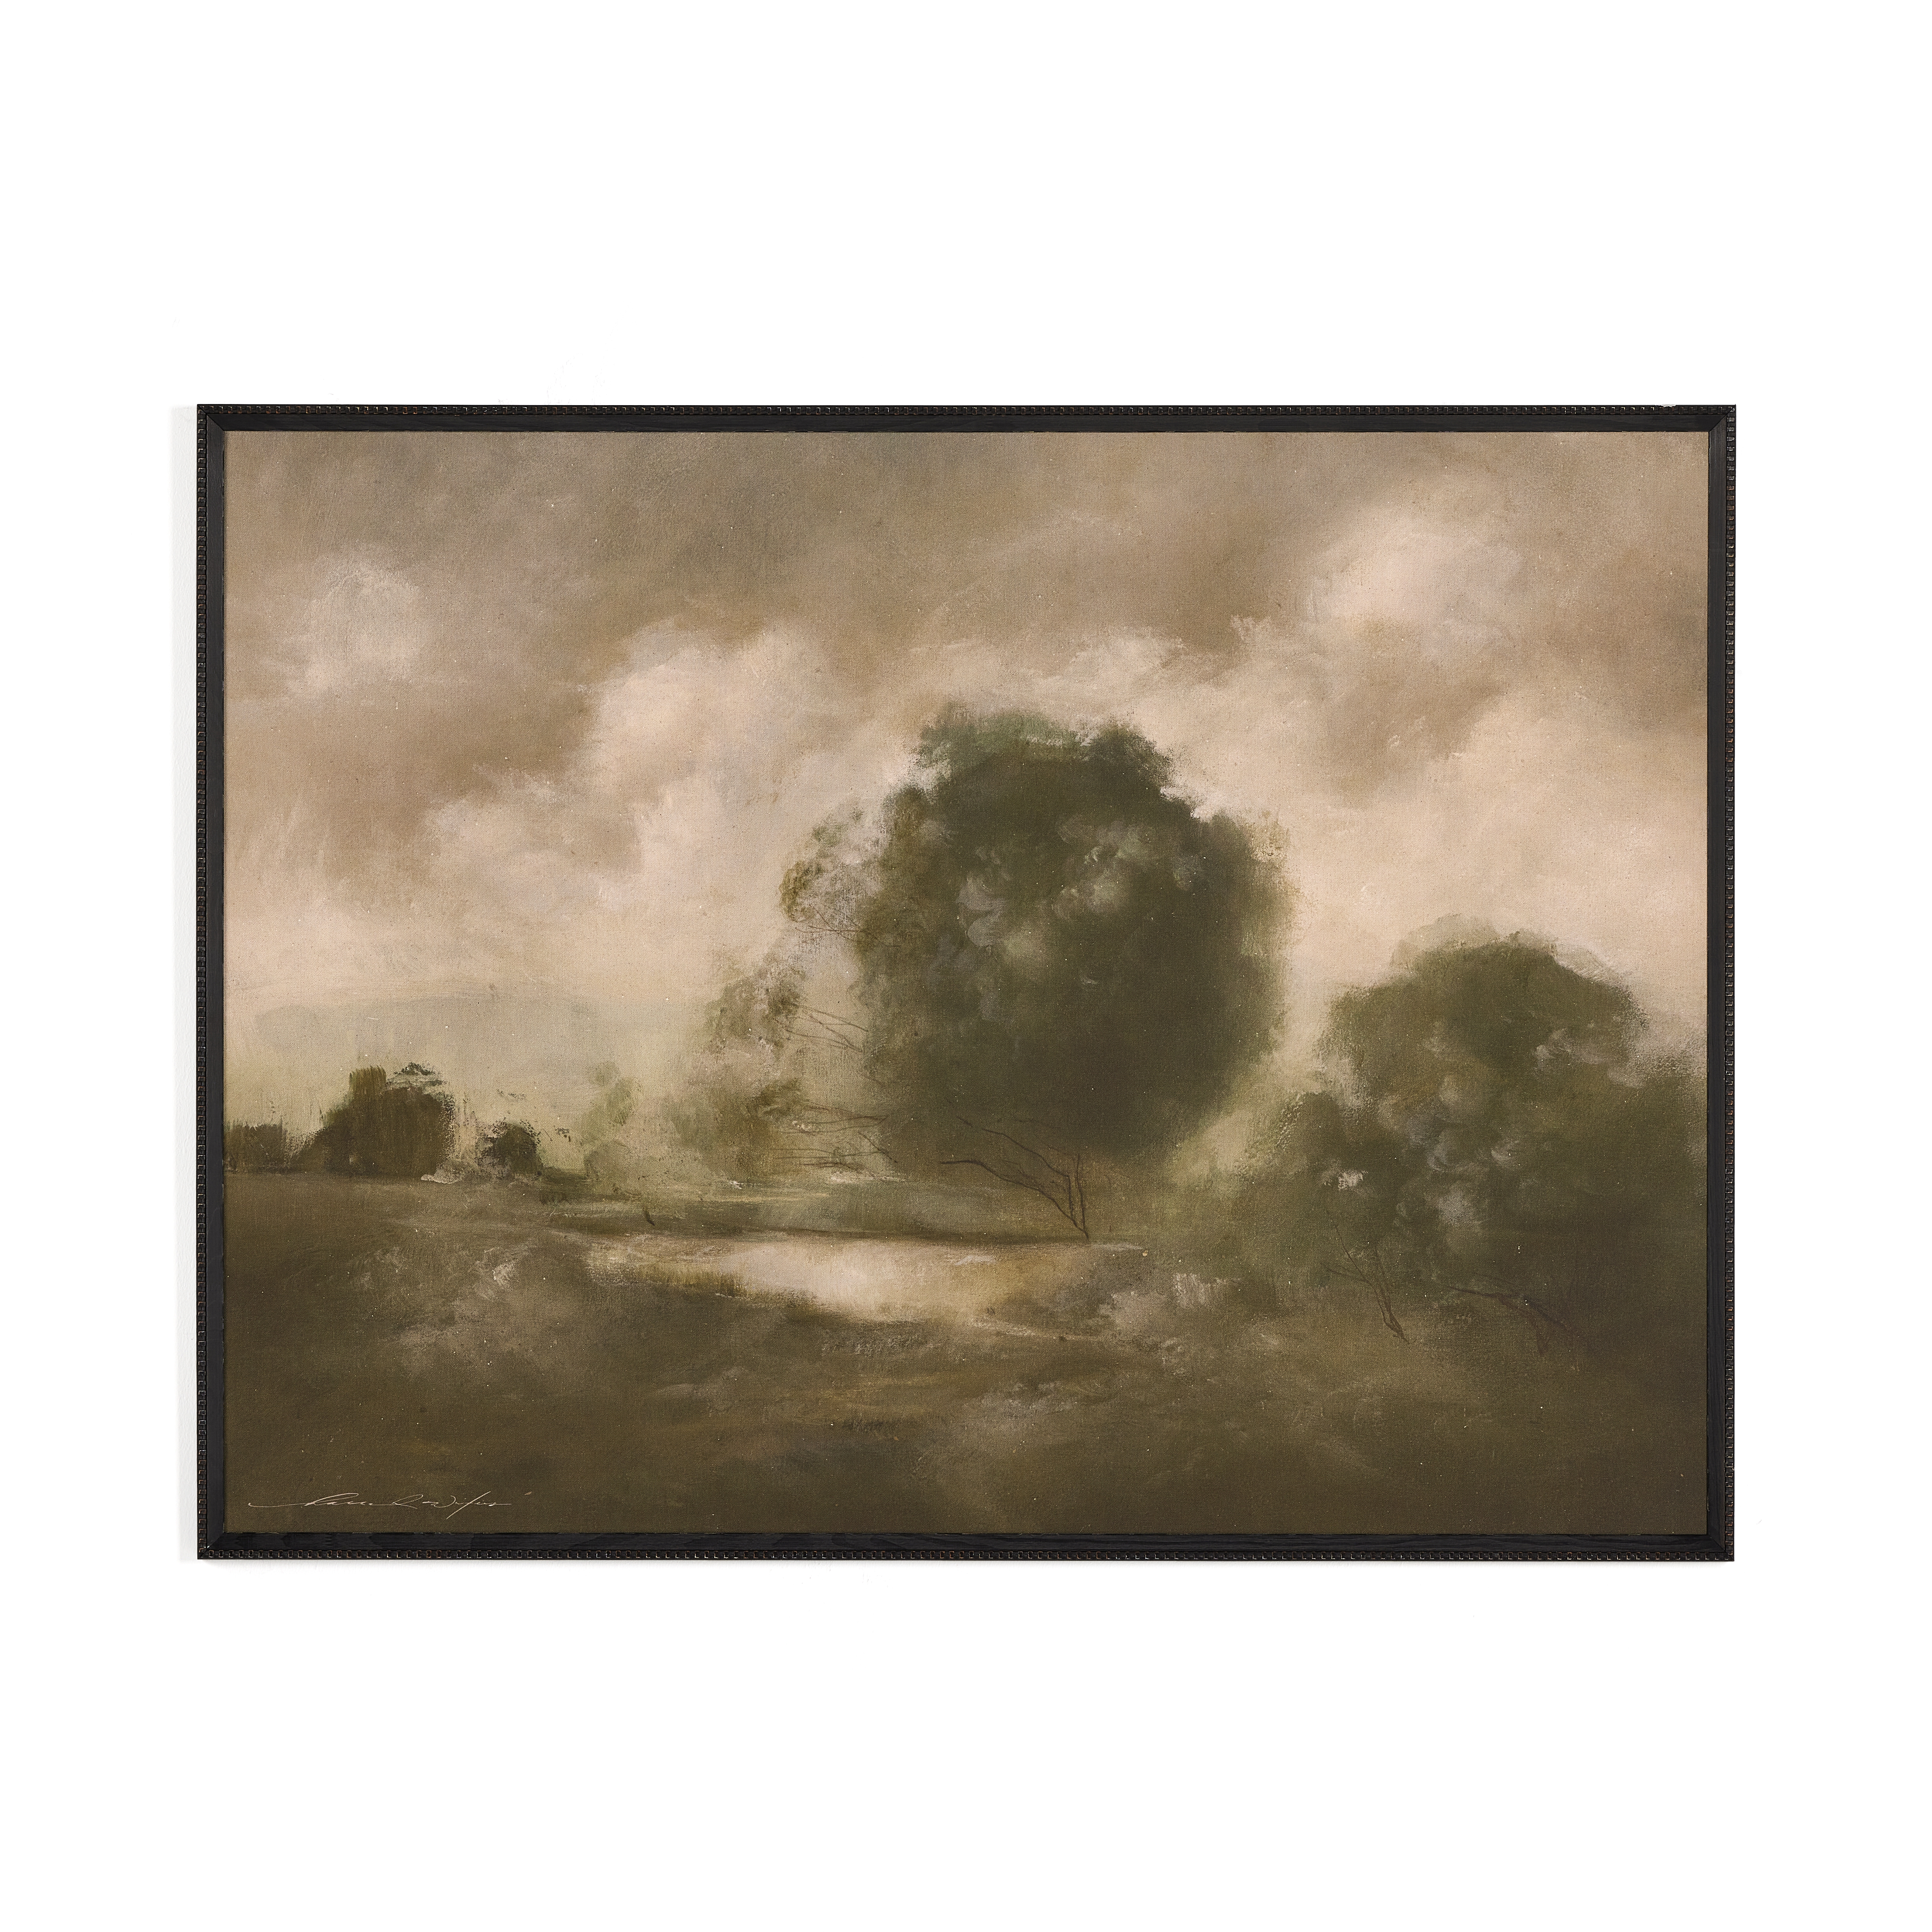 Peace Like a River #3 by Hannah Winters - 1.0 Brimfield Black - Image 0